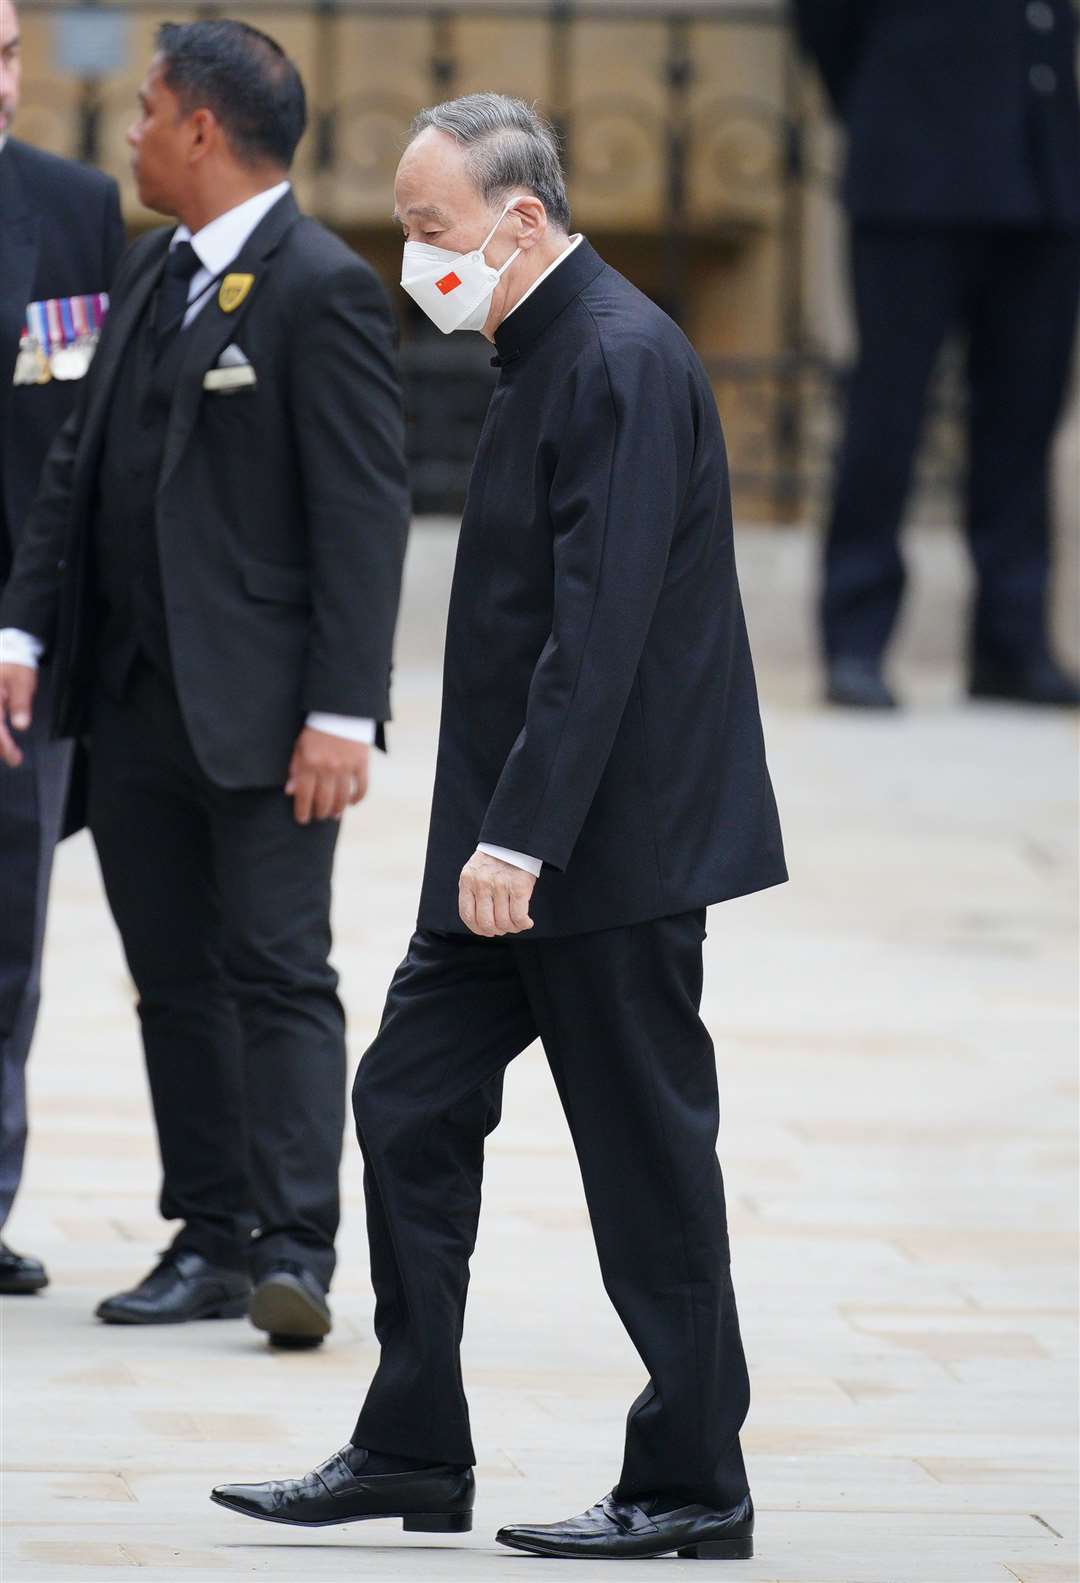 Wang Qishan, China’s then-vice-president, at the Queen’s state funeral (Peter Byrne/PA)